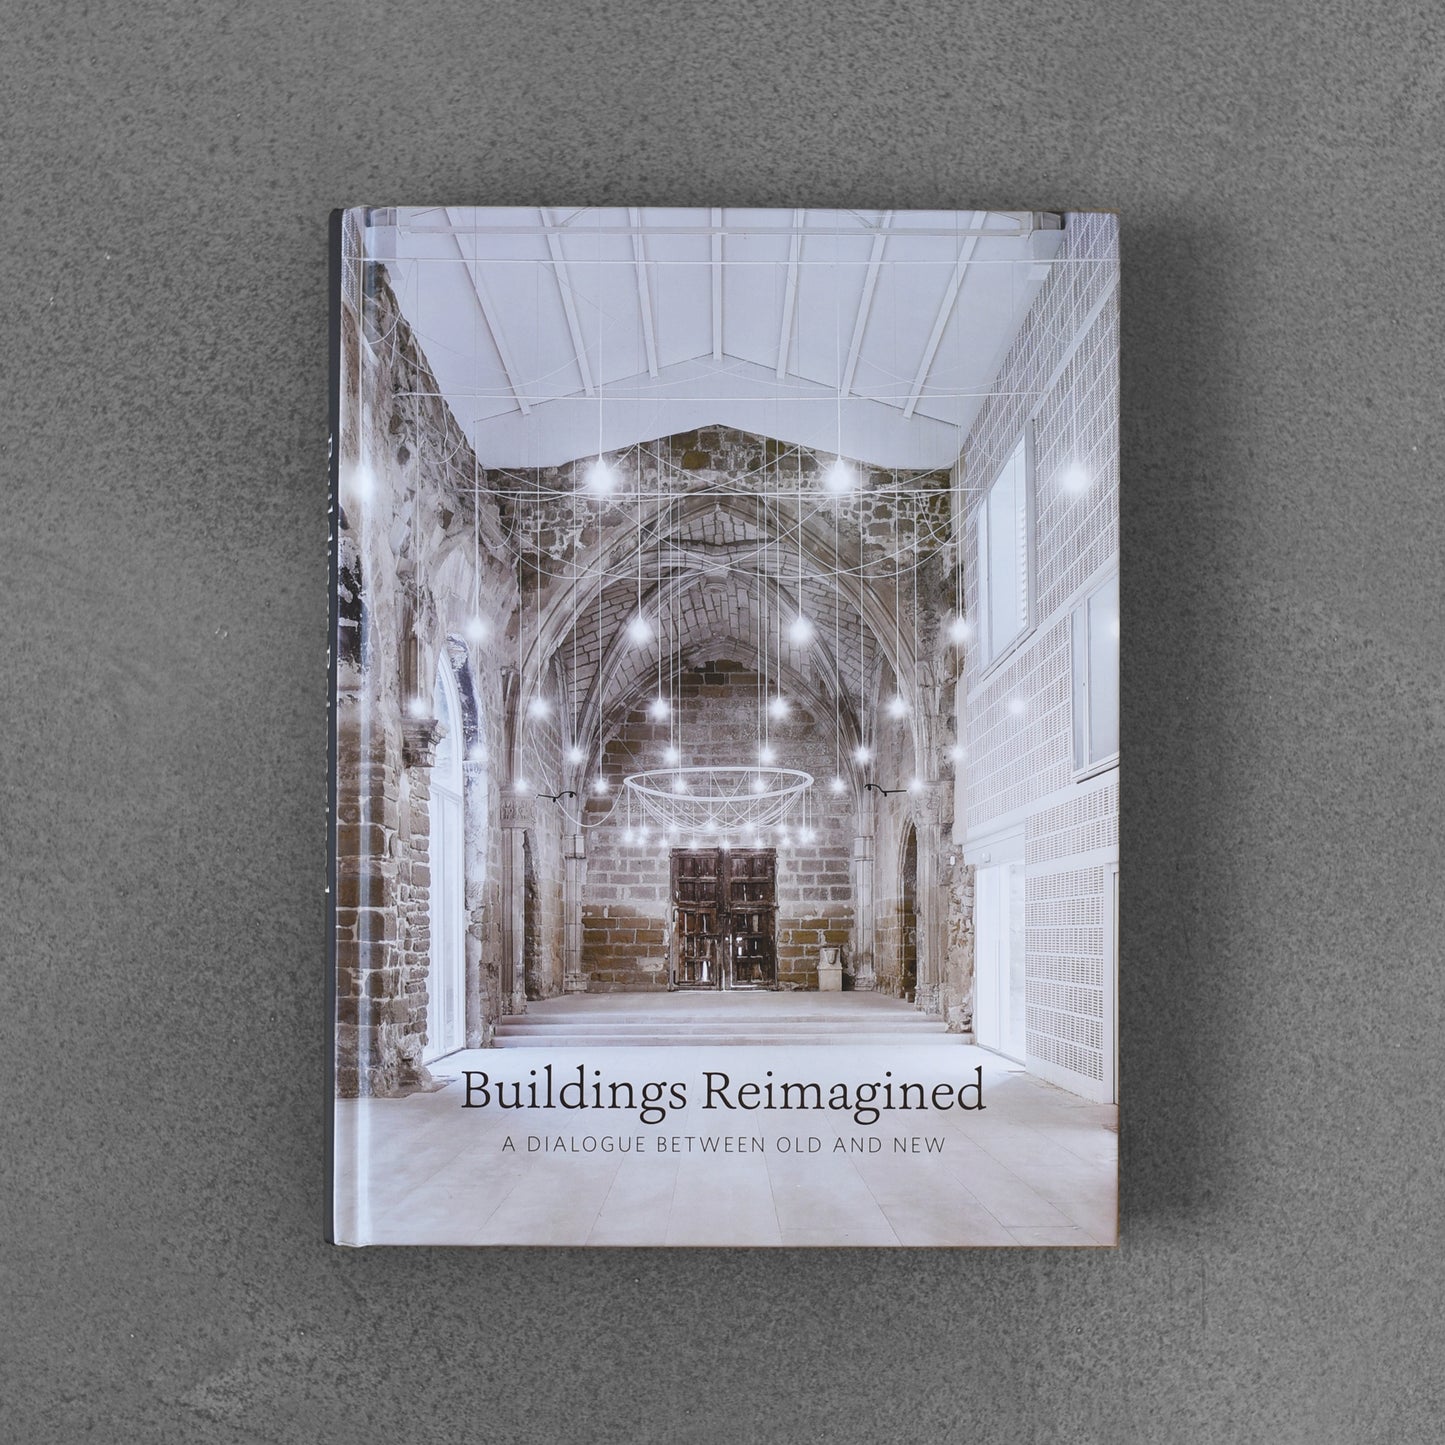 Buildings Reimagined: A Dialogue Between Old and New